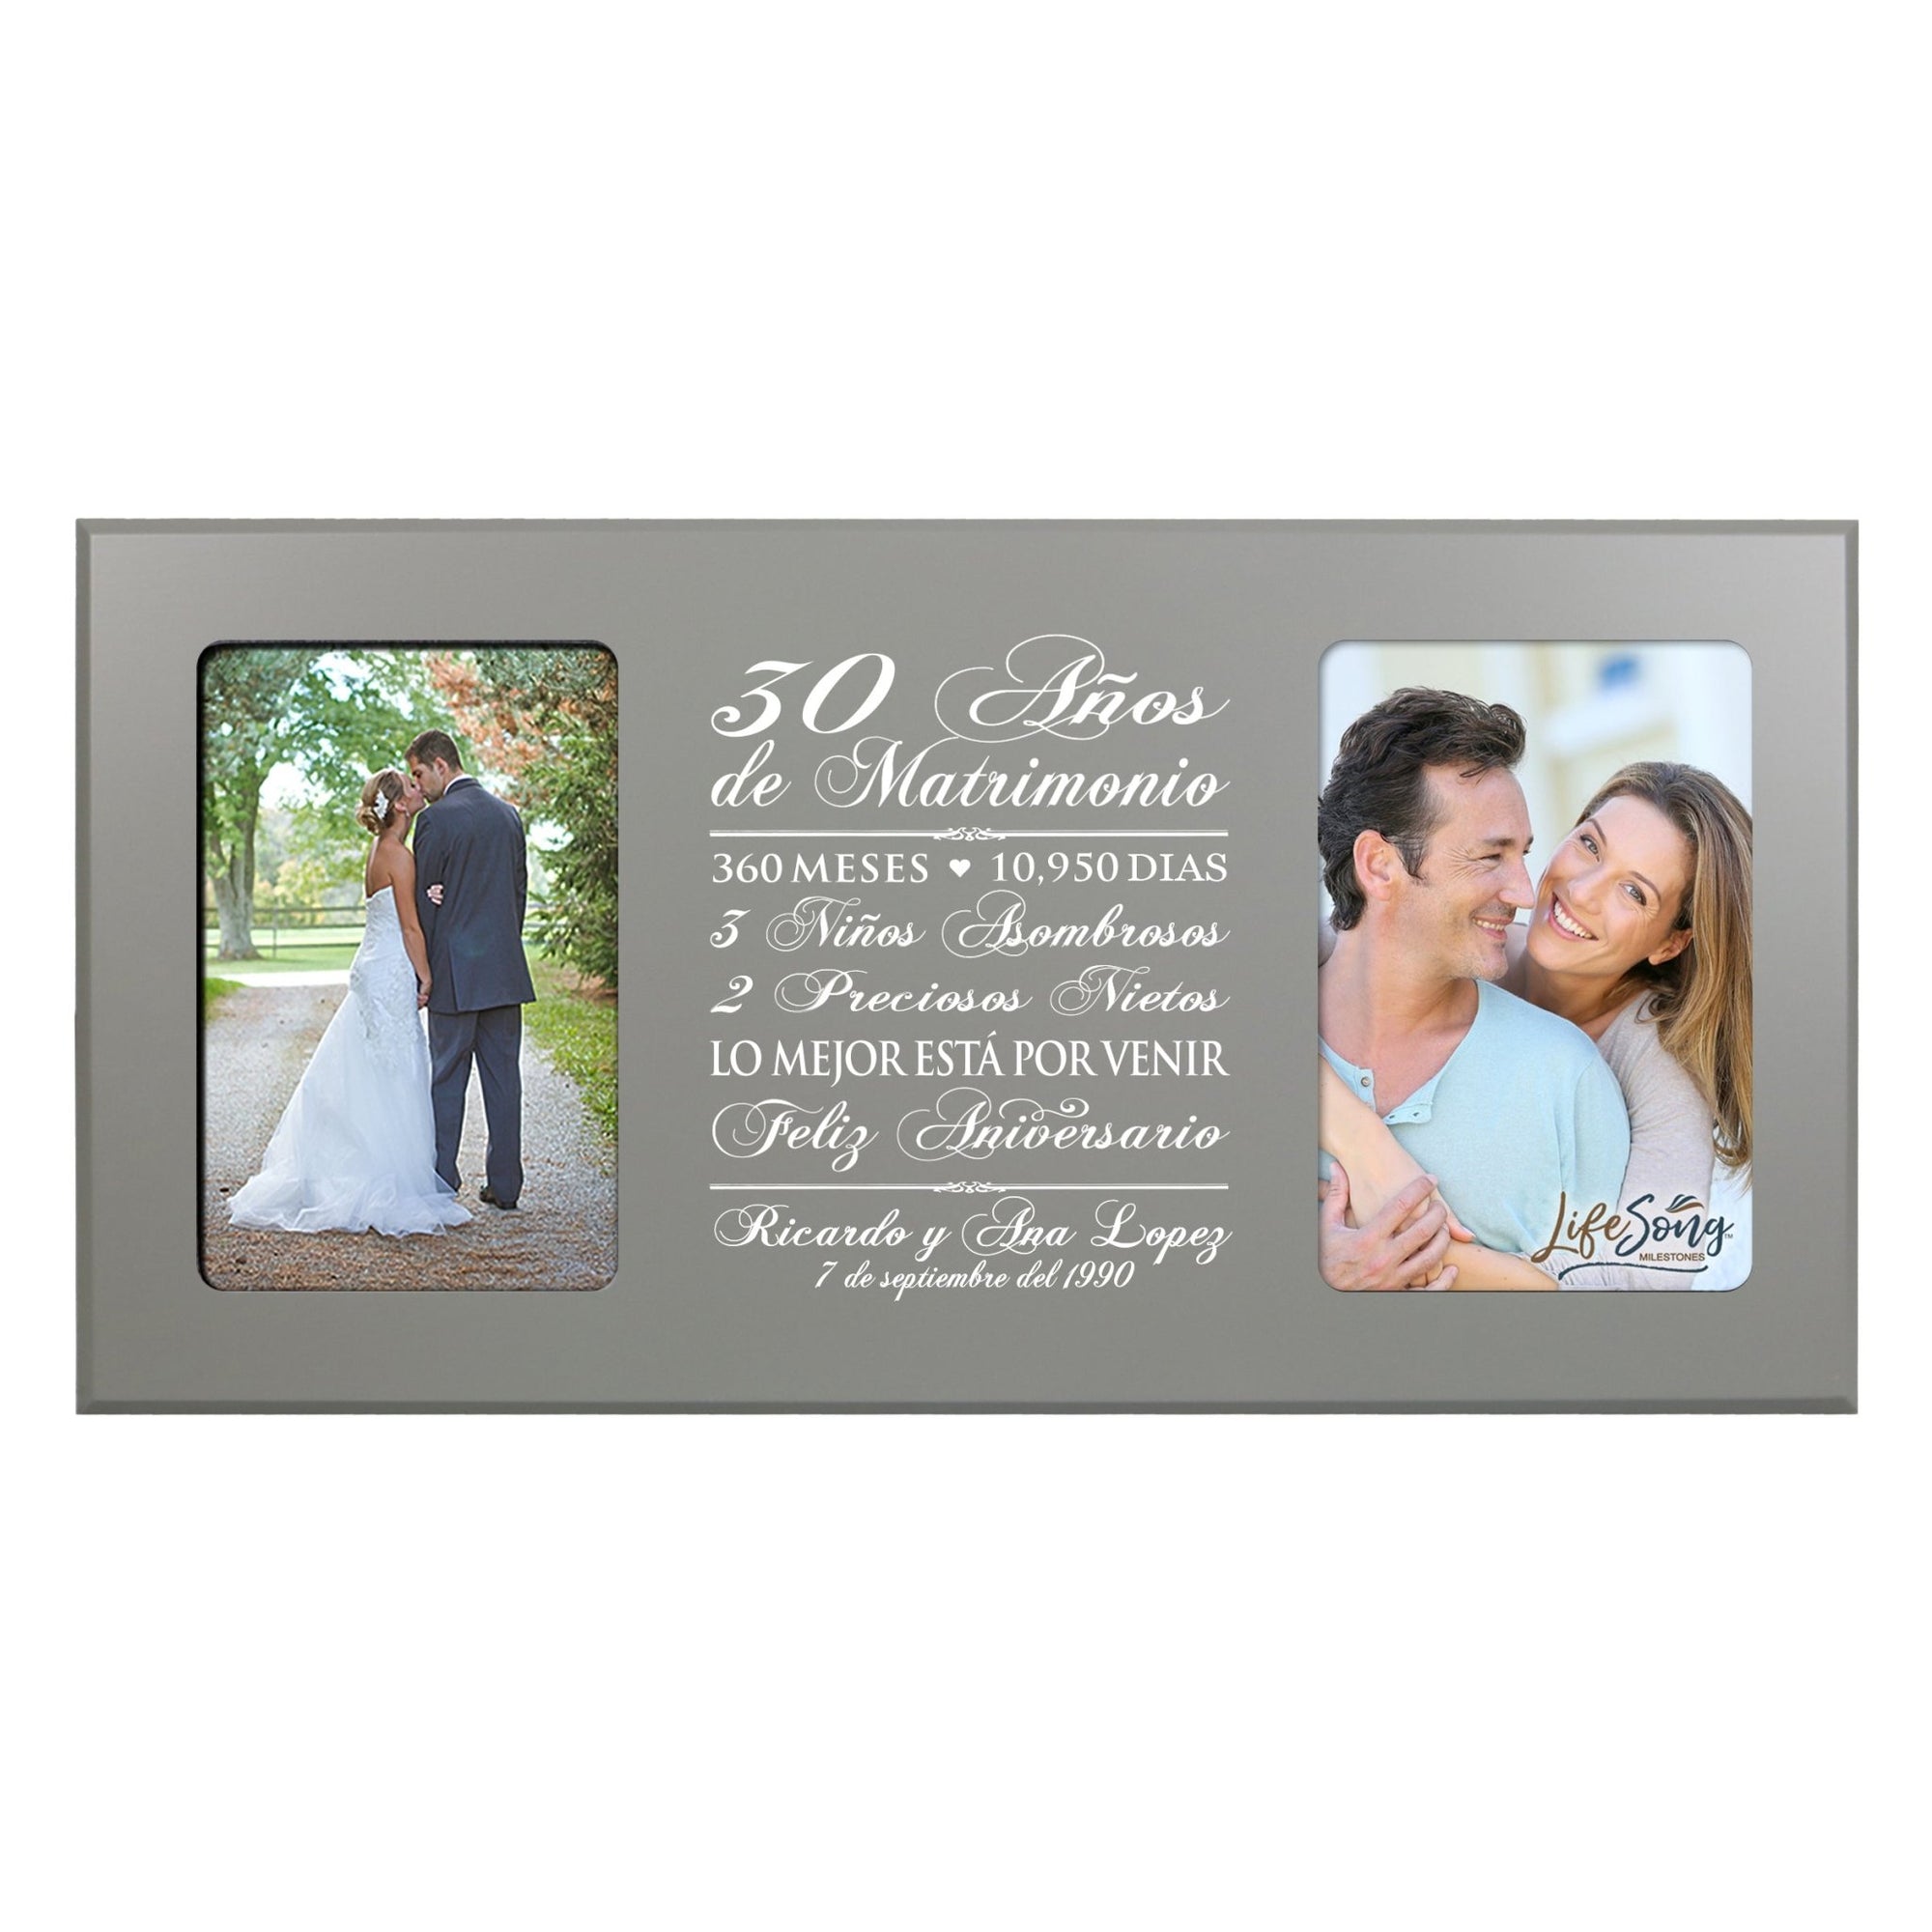 Lifesong Milestones Personalized Couples 30th Wedding Anniversary Spanish Picture Frame